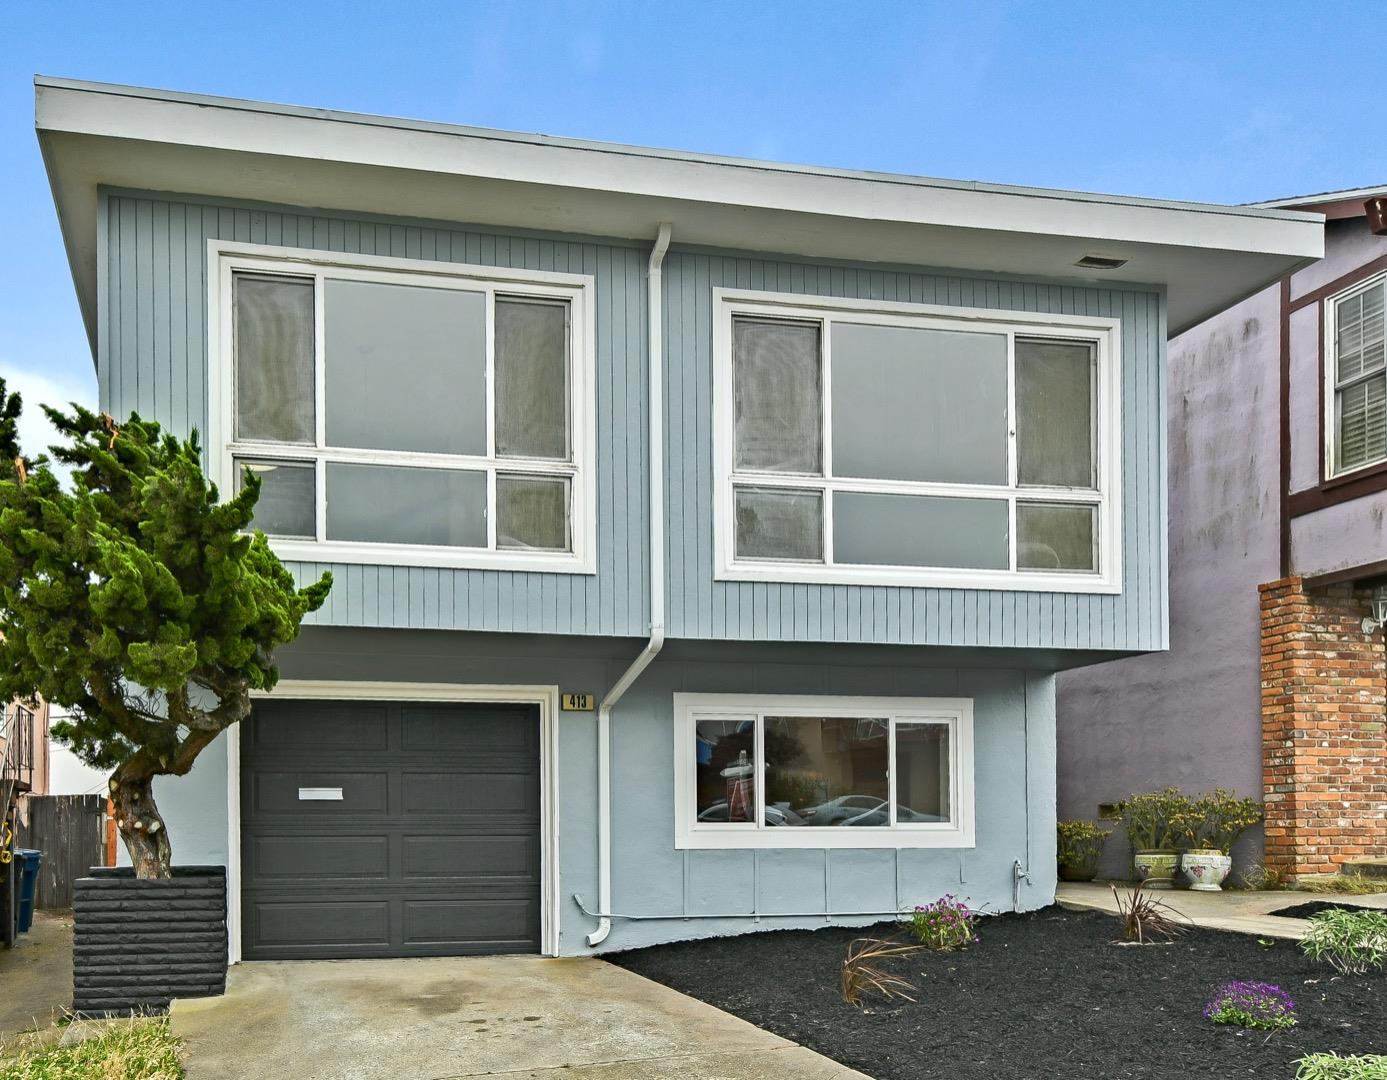 This elegant single family home sits on the very highly desirable St. Francis neighborhood of Daly City! Upon entrance you are warmly greeted by fresh paint, a newly remodeled kitchen, and an inviting living room with extensive natural light. This property boasts 3b/2ba on the upstairs portion of the property. Downstairs you'll find another bathroom, bedroom and a bonus room that provides additional flexibility! Conveniently located close to shopping, grocery, restaurants, and freeway. Easy access to San Francisco & Silicon Valley.